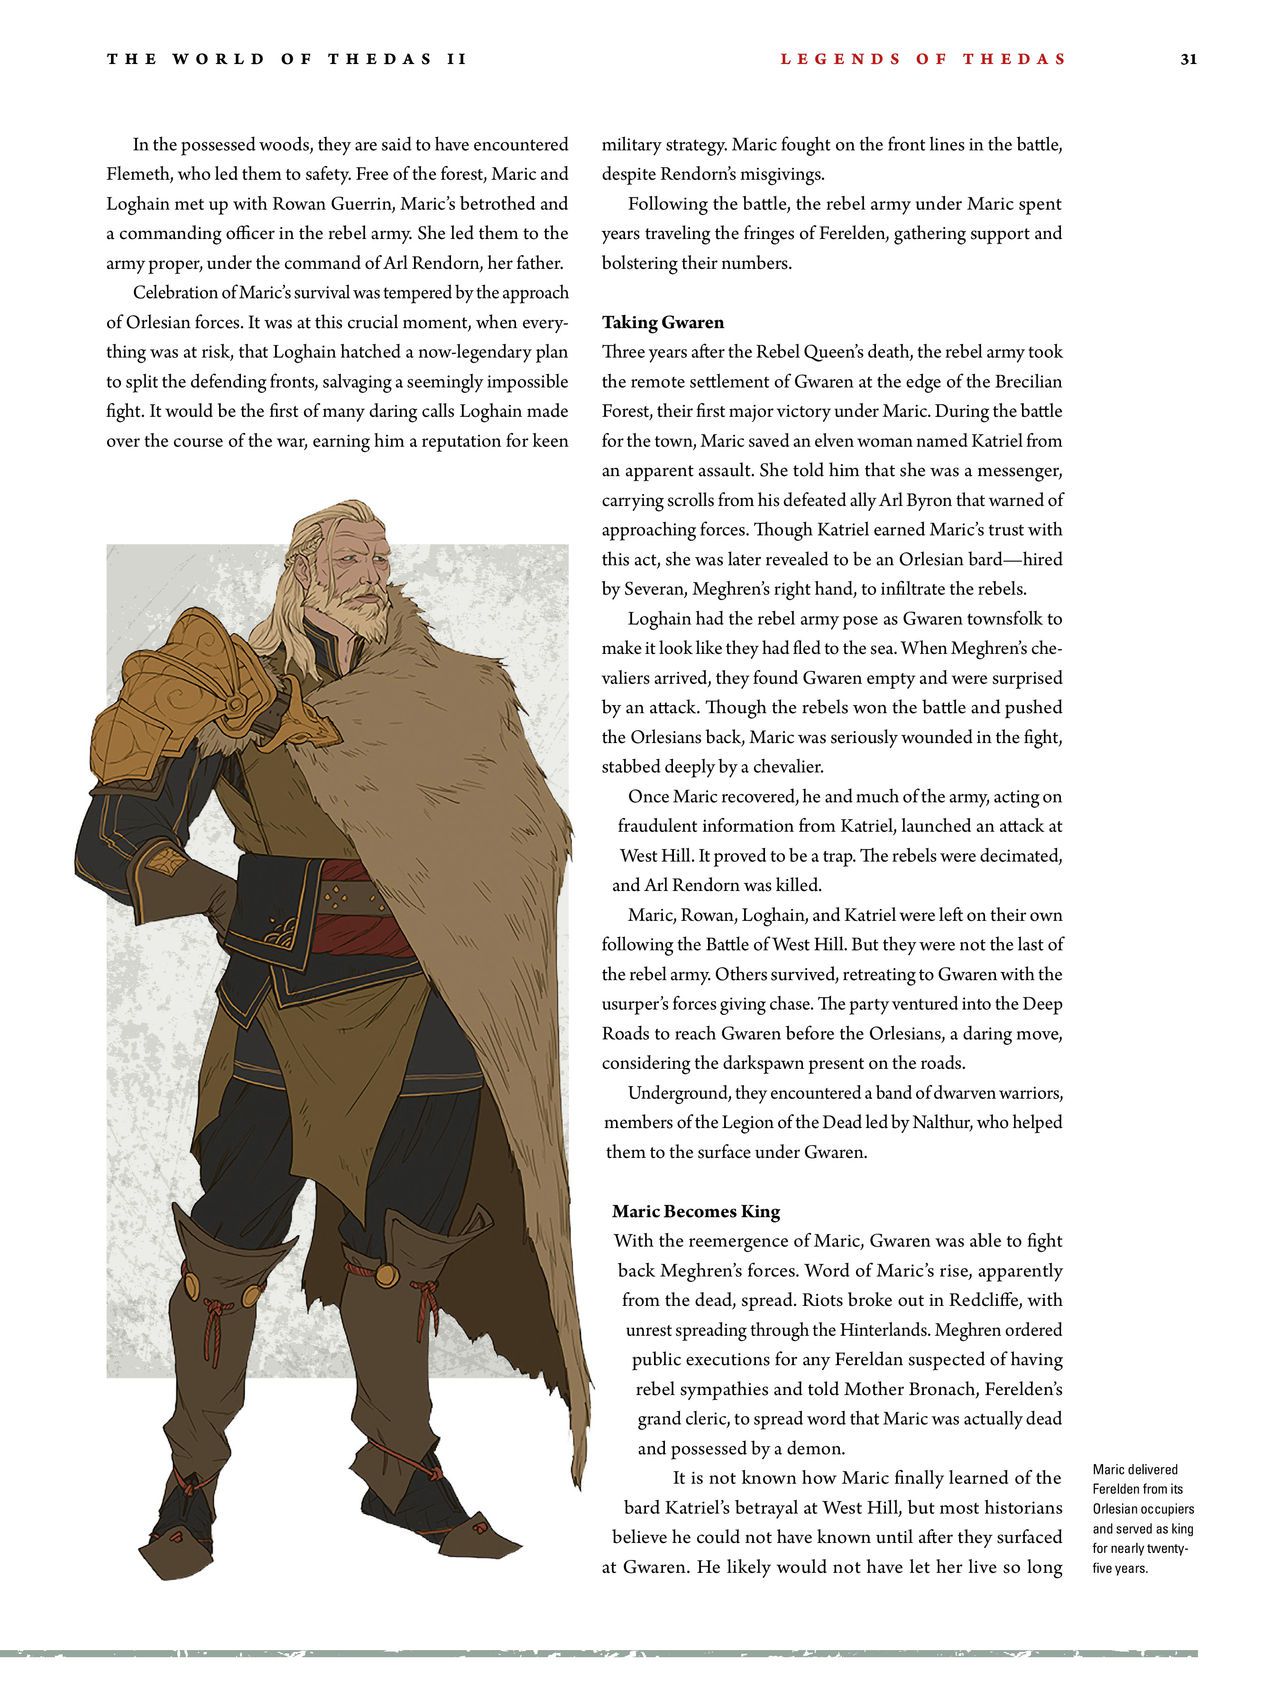 Dragon Age - The World of Thedas v02 28